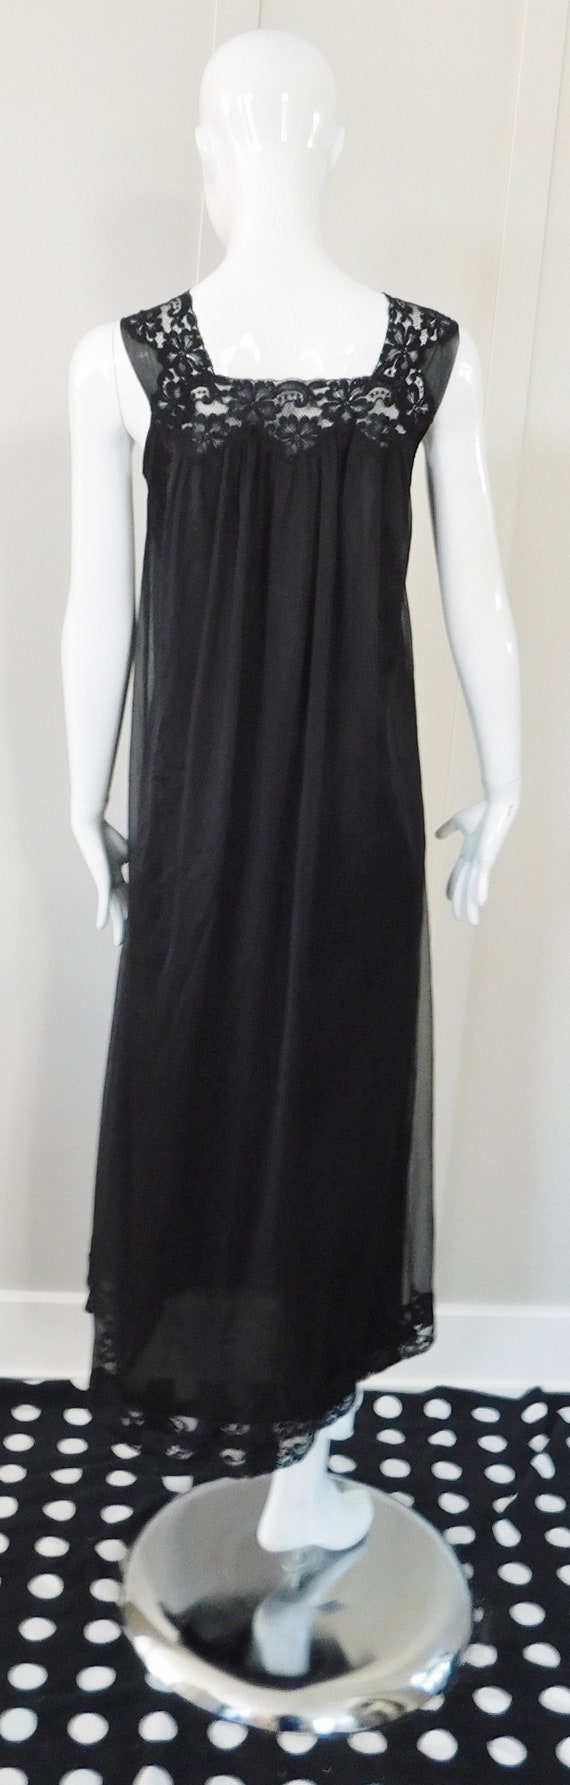 1960's Vintage French Maid Square Neck Nightgown - image 6